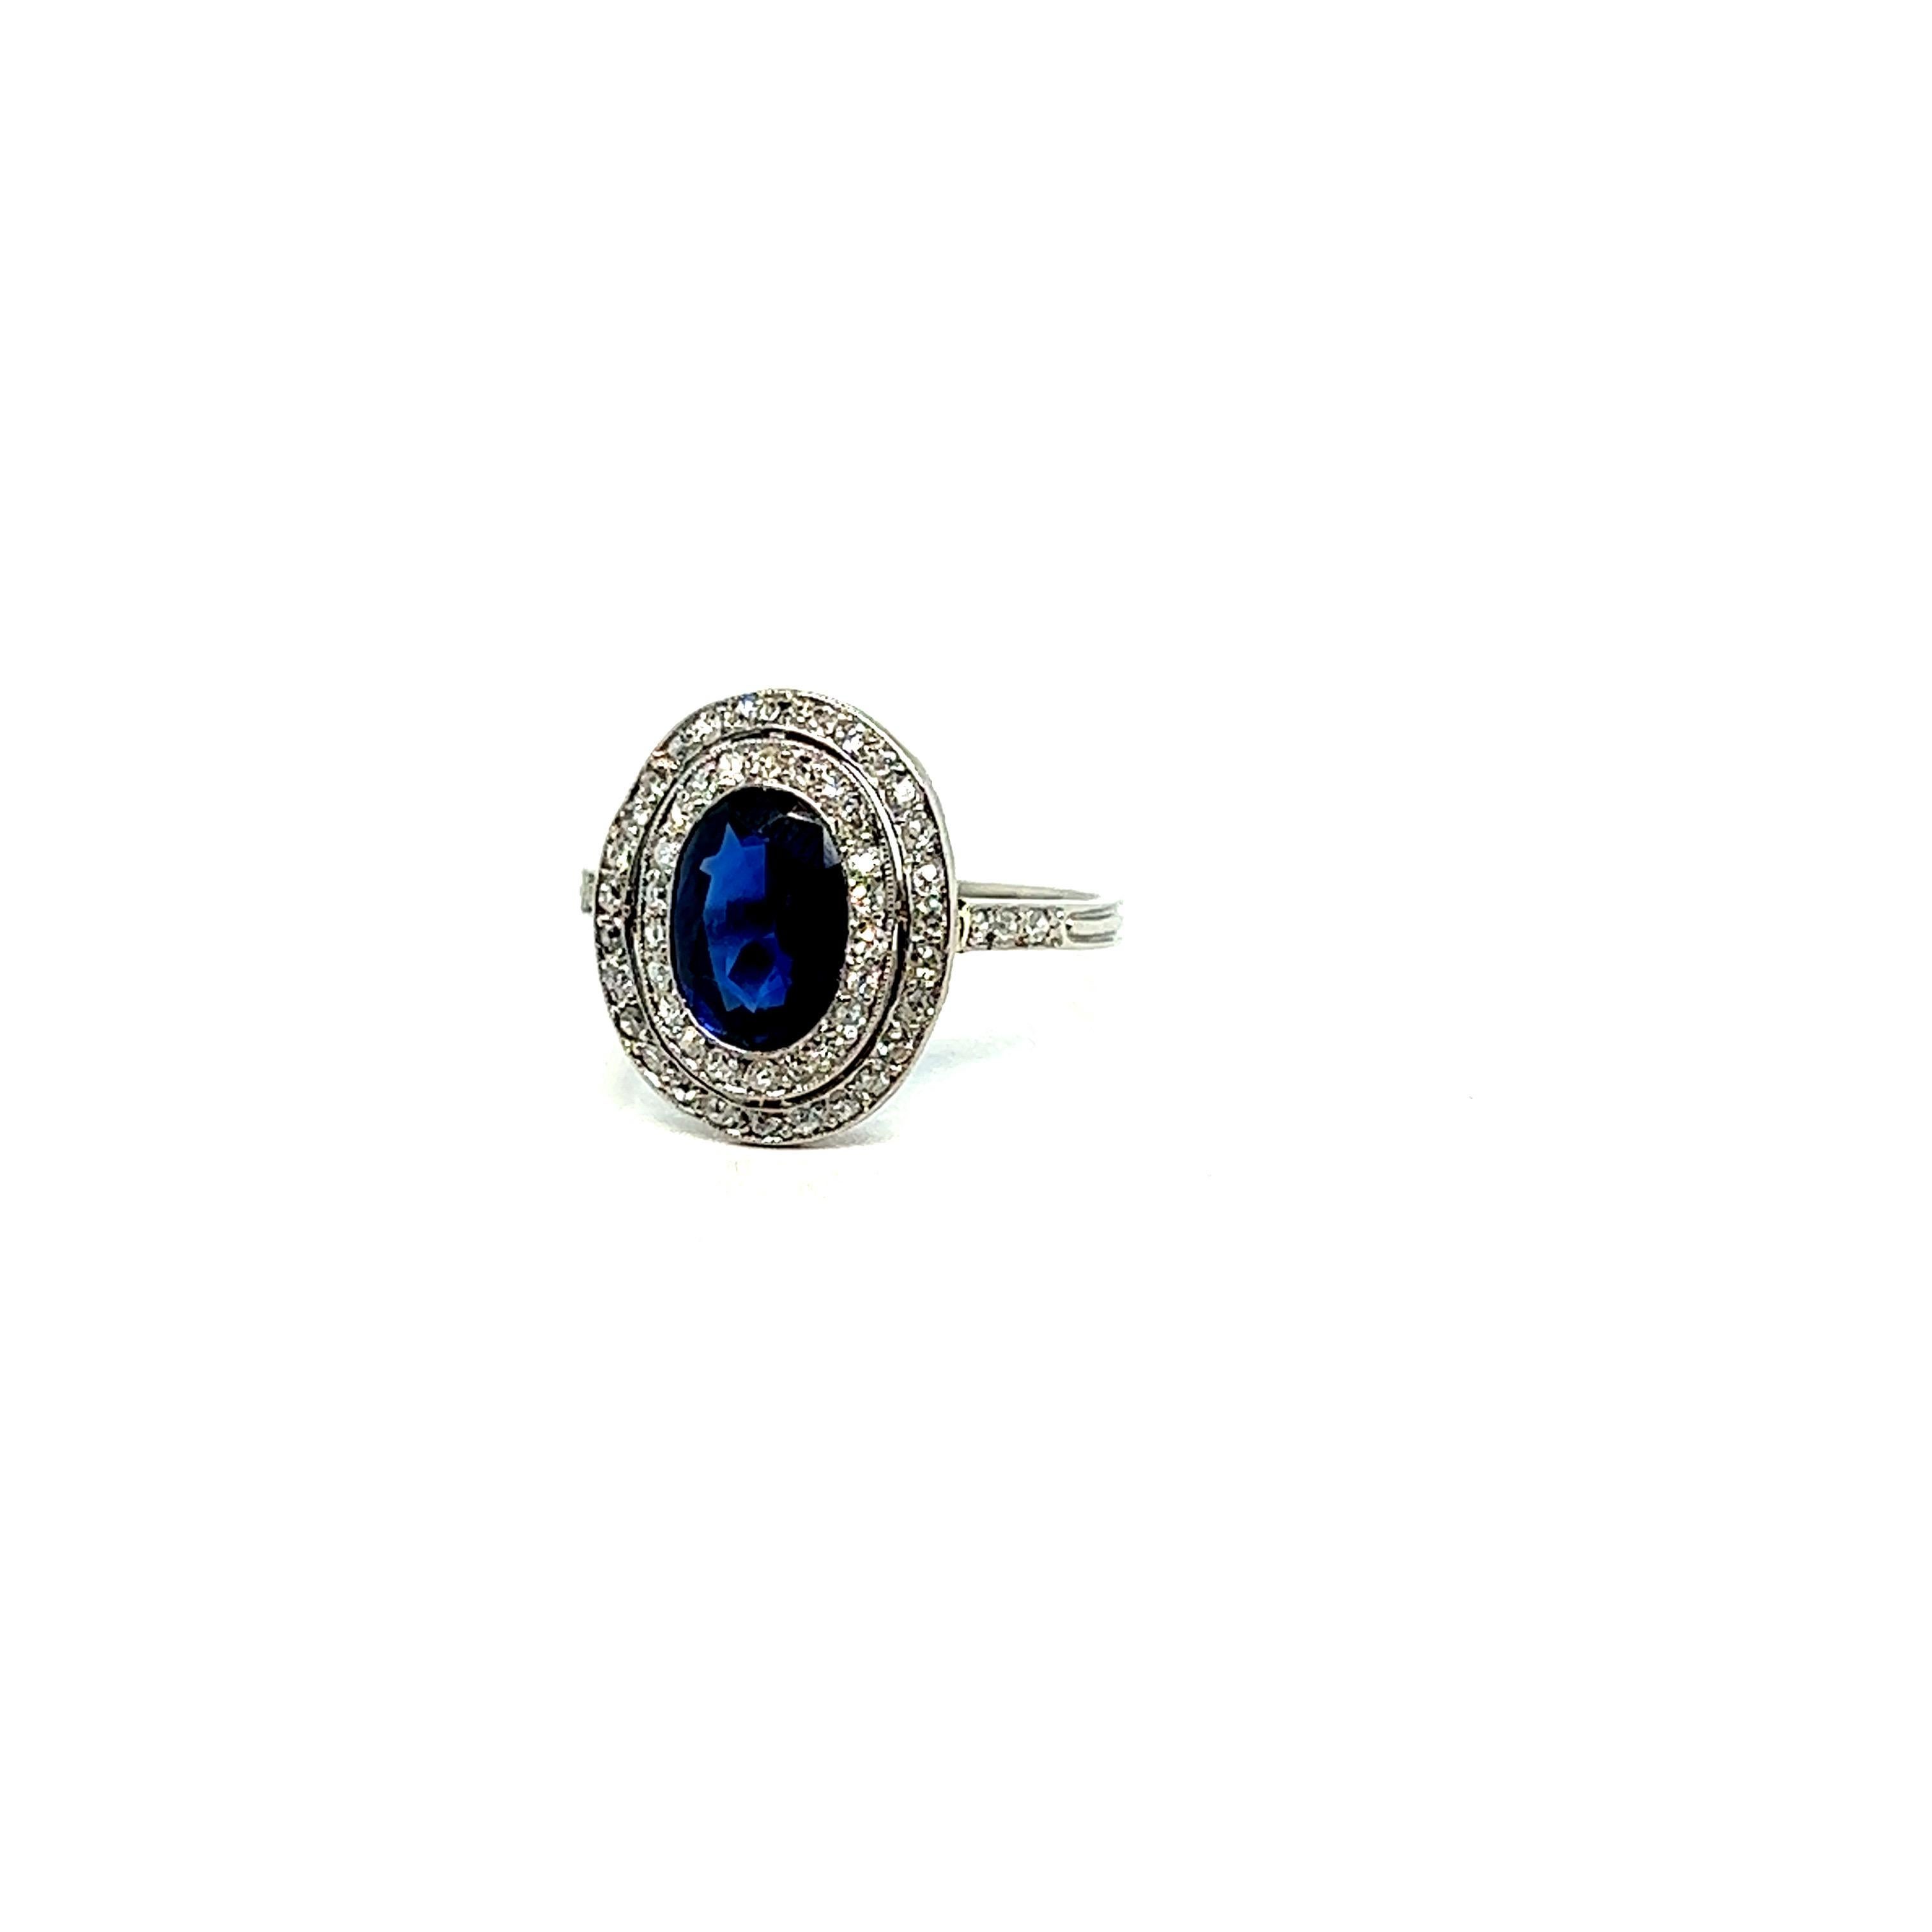 Women's Vintage French Engagement Oval Cluster Ring Blue Sapphire 2.5C Platinum Diamonds